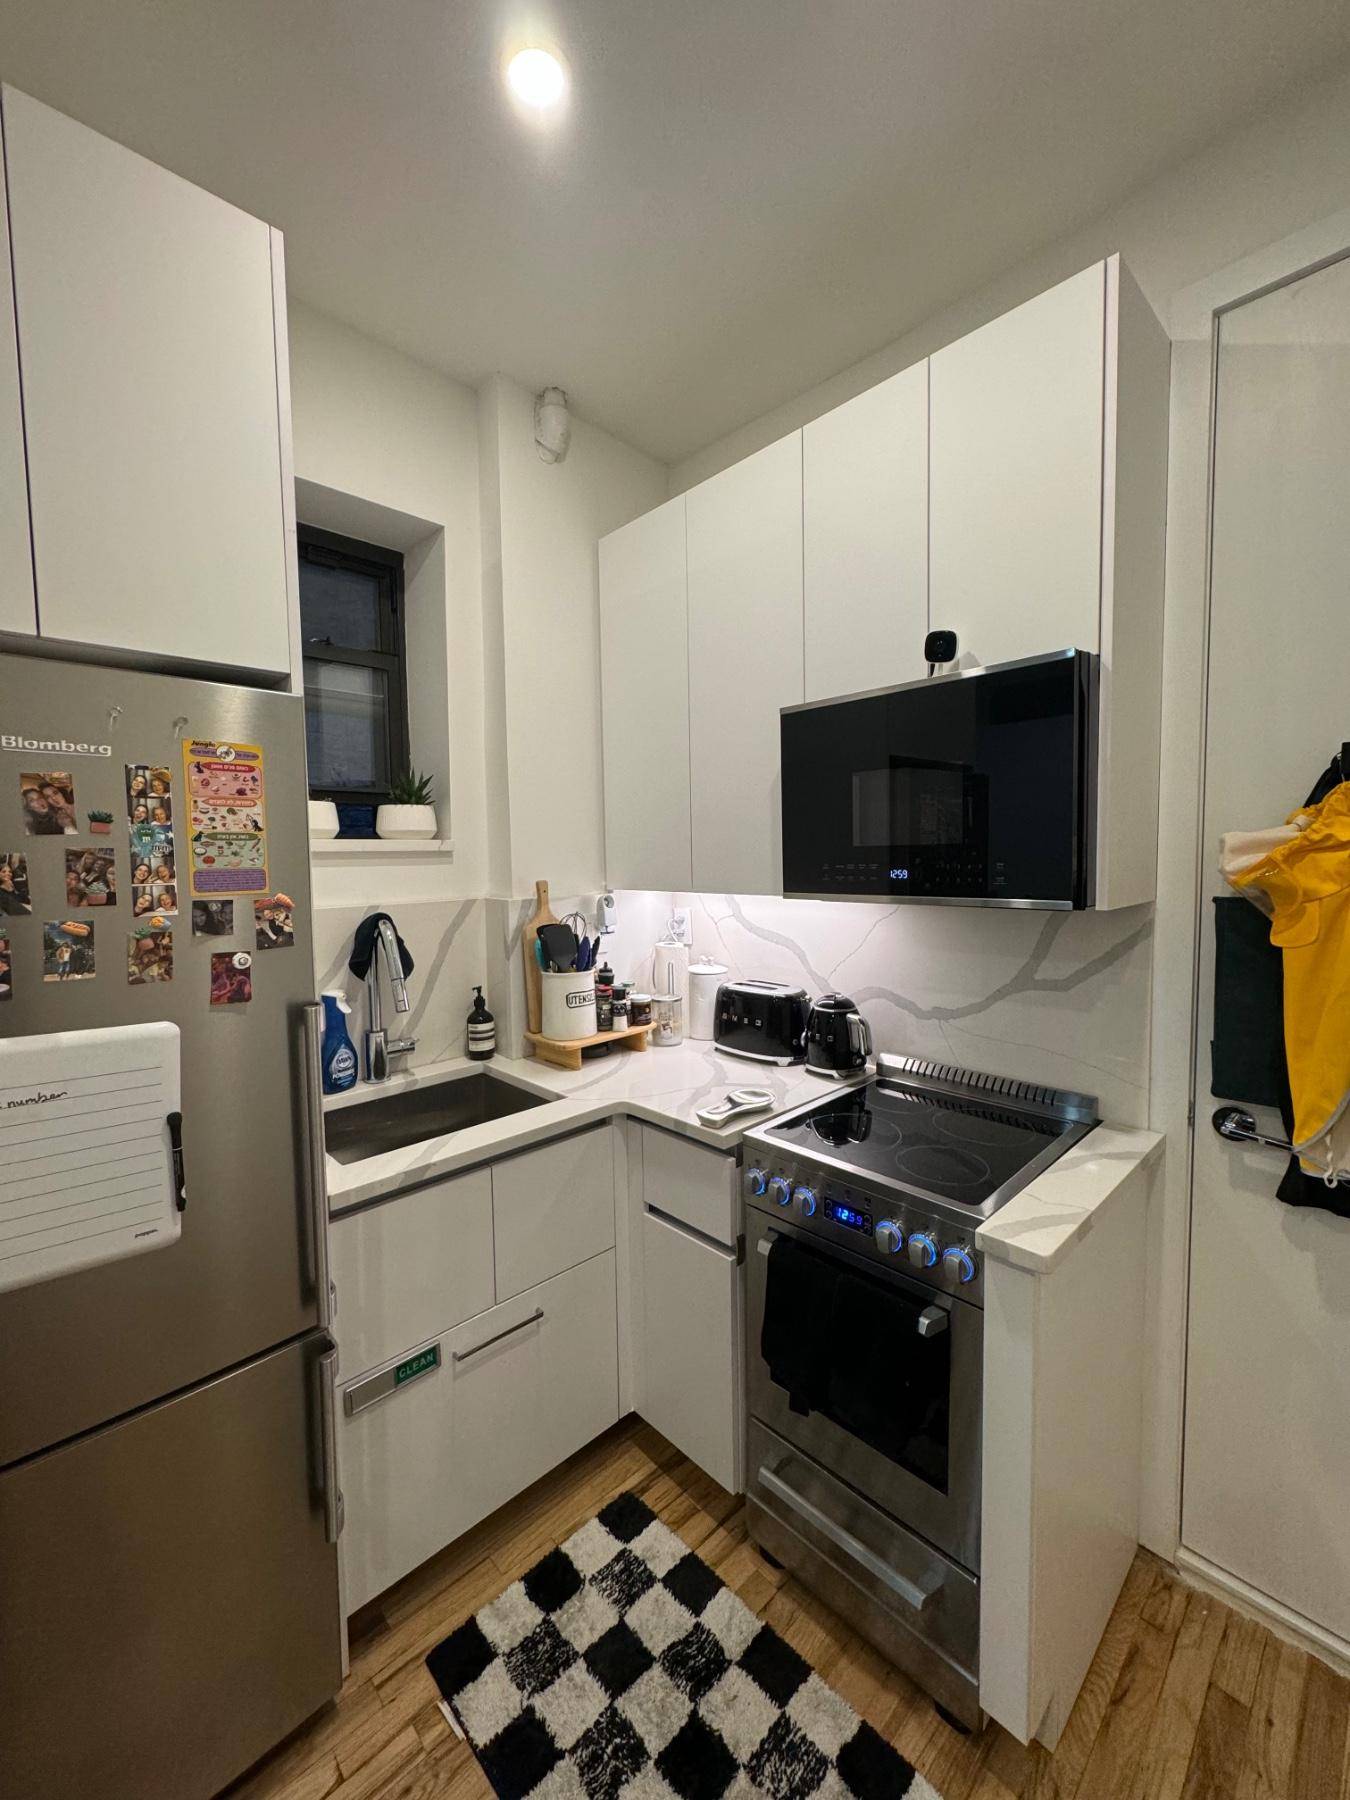 1 bed prime prime ChelseaFor a very early May move inApartment includes Open kitchen layout with ample storage Dishwasher and microwave included Windows throughout Bedroom fit full queen size bed ...